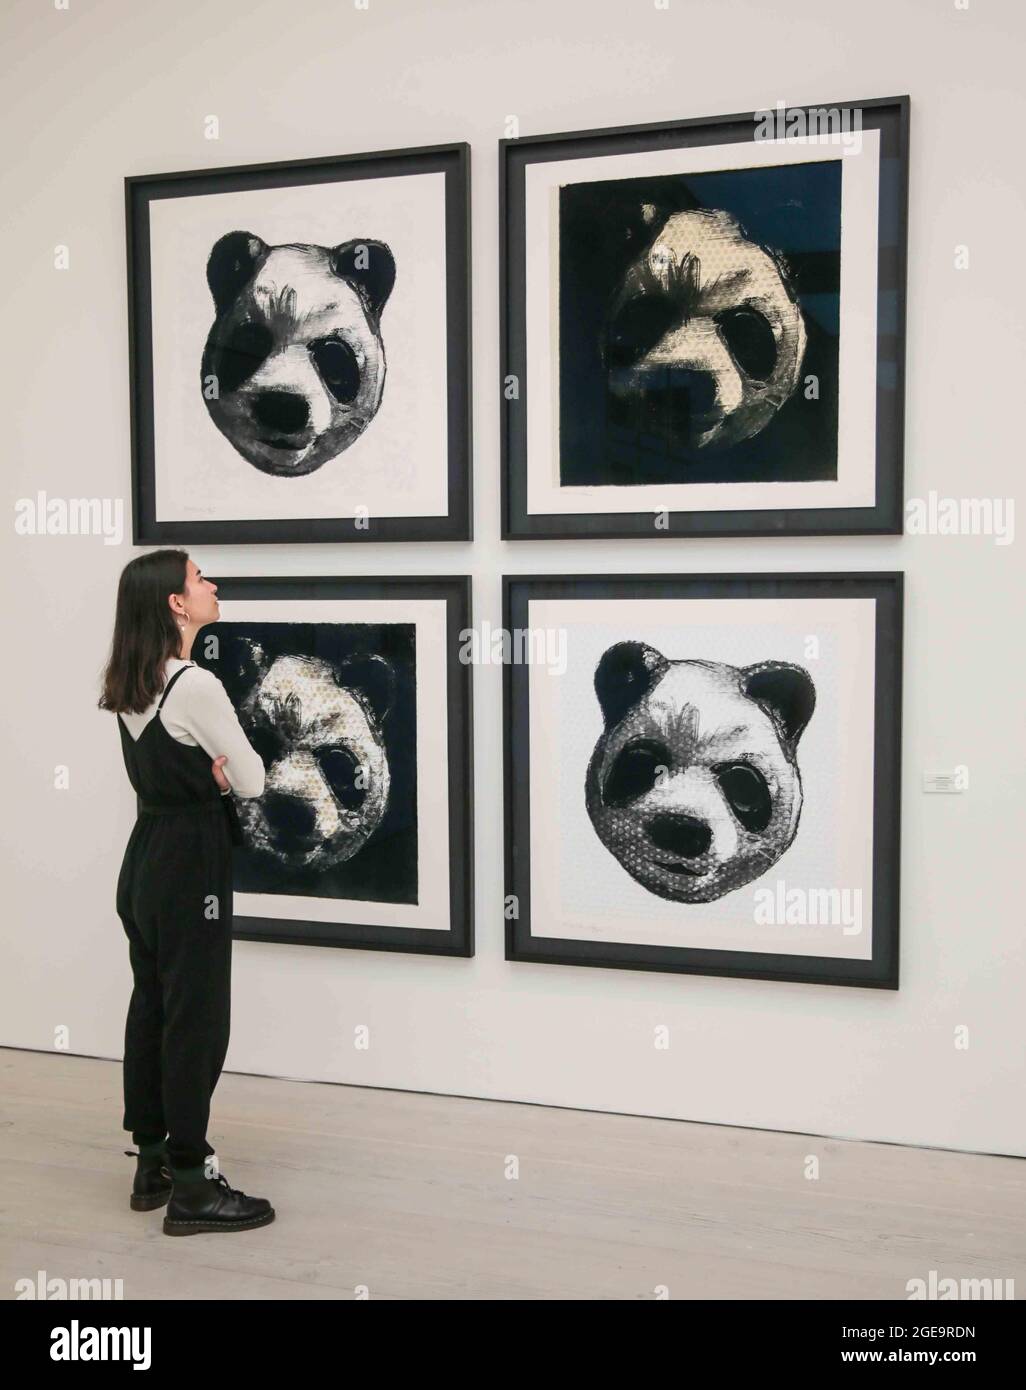 London UK 18 August 2021 RIGHT HERE RIGHT NOW. Charming Baker Flocked Panda Head Series, 2018.The 4,000 sq. ft exhibition will open in two gallery spaces at Saatchi Gallery on Thursday, 19 August 2021 until 9 September 2021.The exhibition features artworks by established artists such as Jake & Dinos Chapman, Charming Baker, David Shrigley and Chris Levine together with works by London based painter Matt Small and mural & installation artist Morag Myerscough. The show will also include previously unseen original work by Gary Stranger, Jessica Albarn, Eelus, Sara Pope and an exciting new collabo Stock Photo